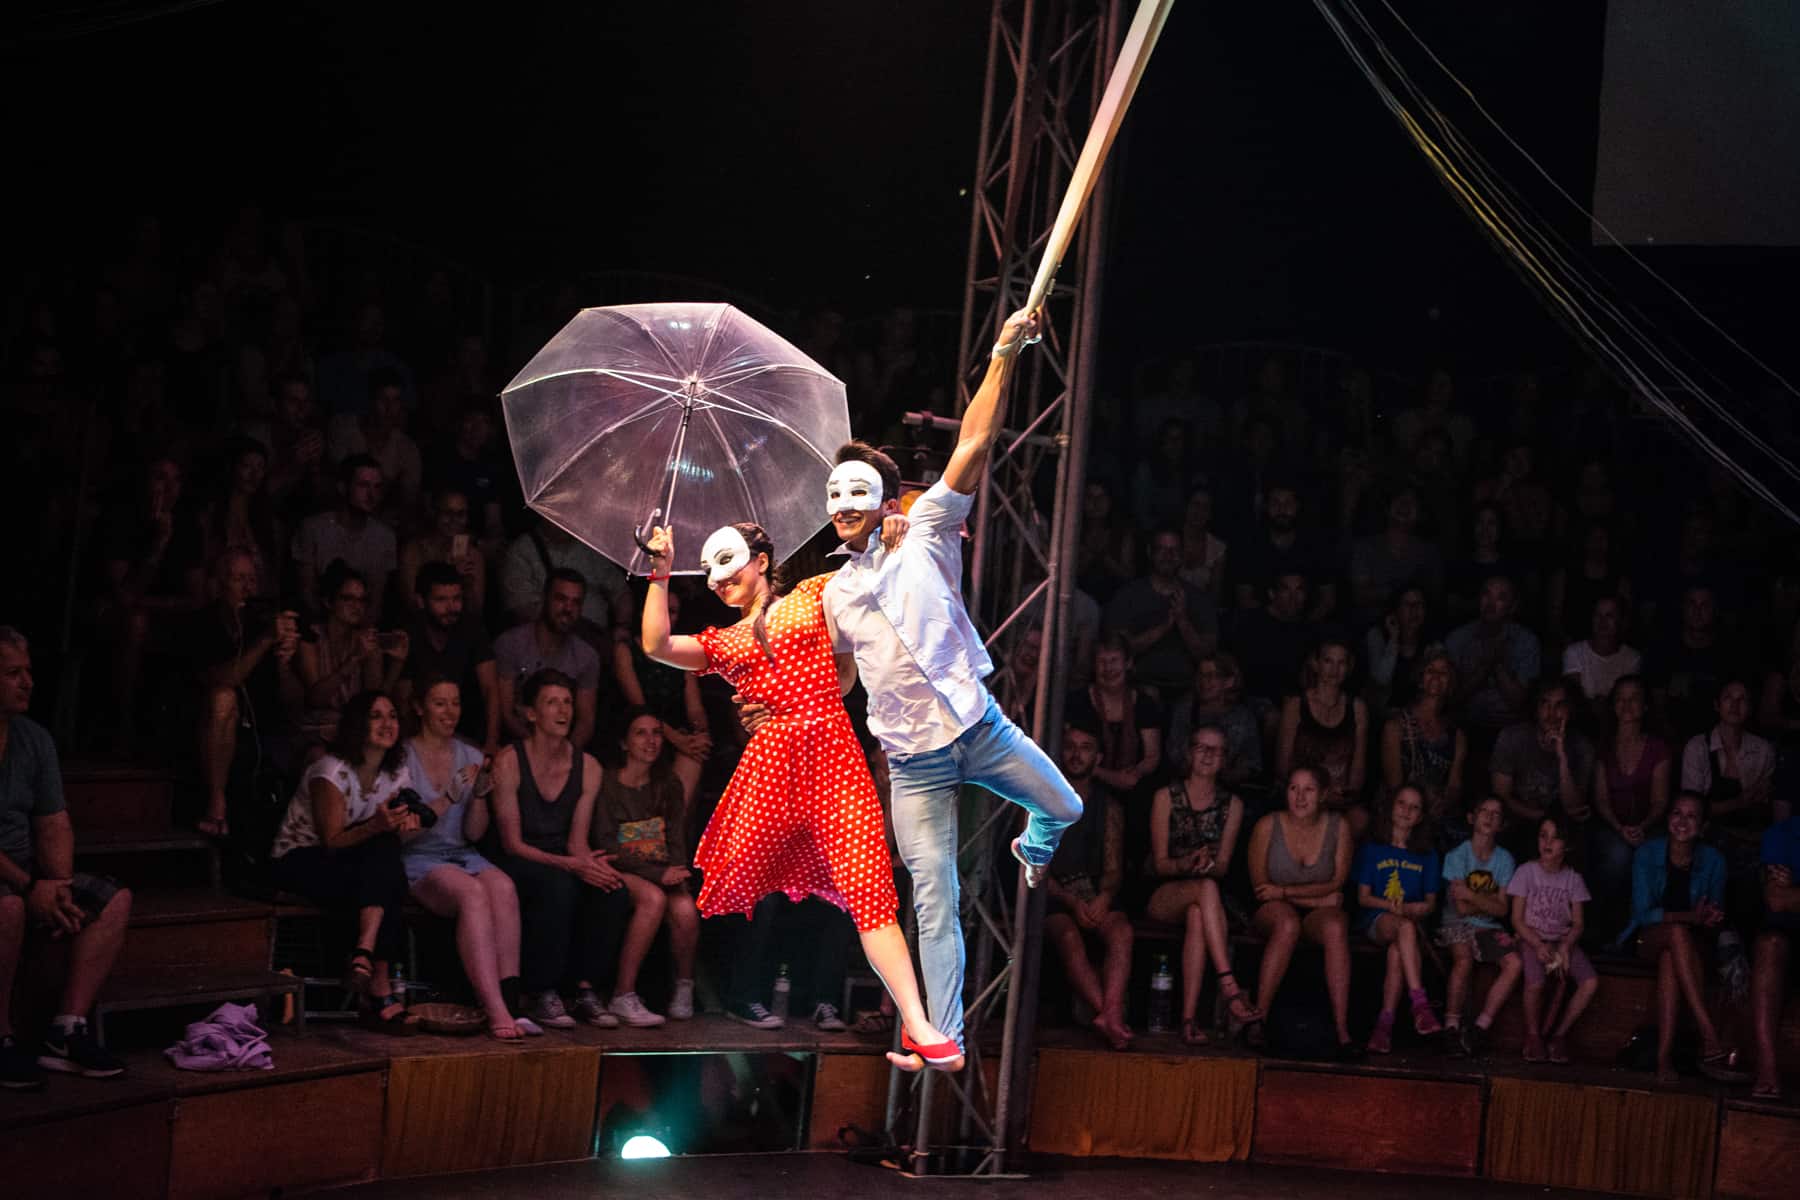 A white-masked woman in a red dress, holding an umbrella and a white-masked man man in blue jeans an a white top holding onto a rope perform a mid-air acrobatic performance in front of a audience in a circus in Siem Reap.